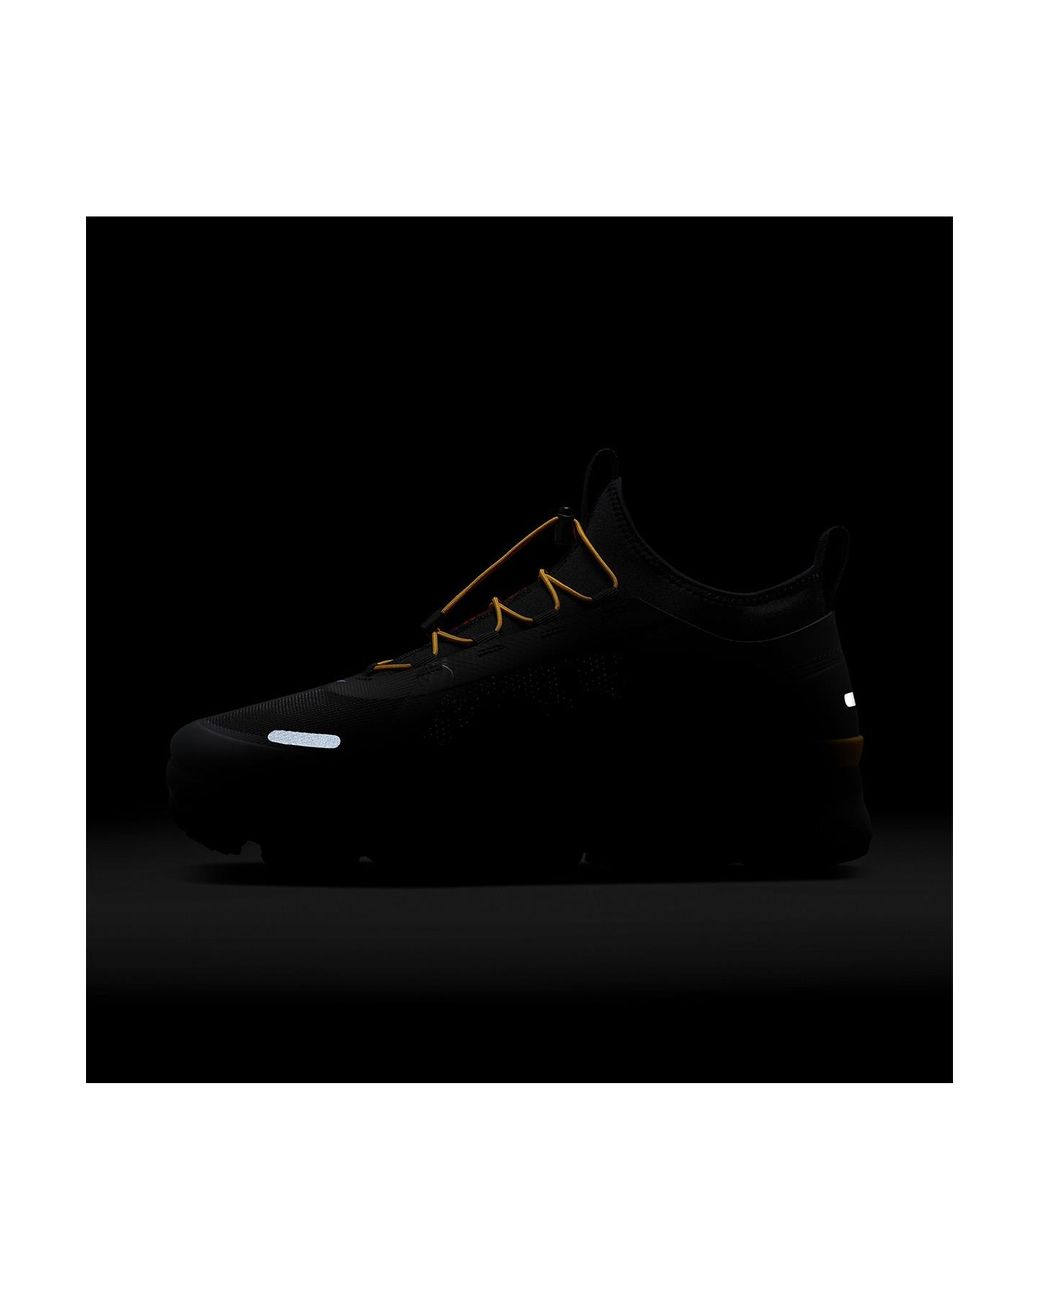 Nike Air Vapormax 2019 Utility Running Shoes in Black for Men | Lyst